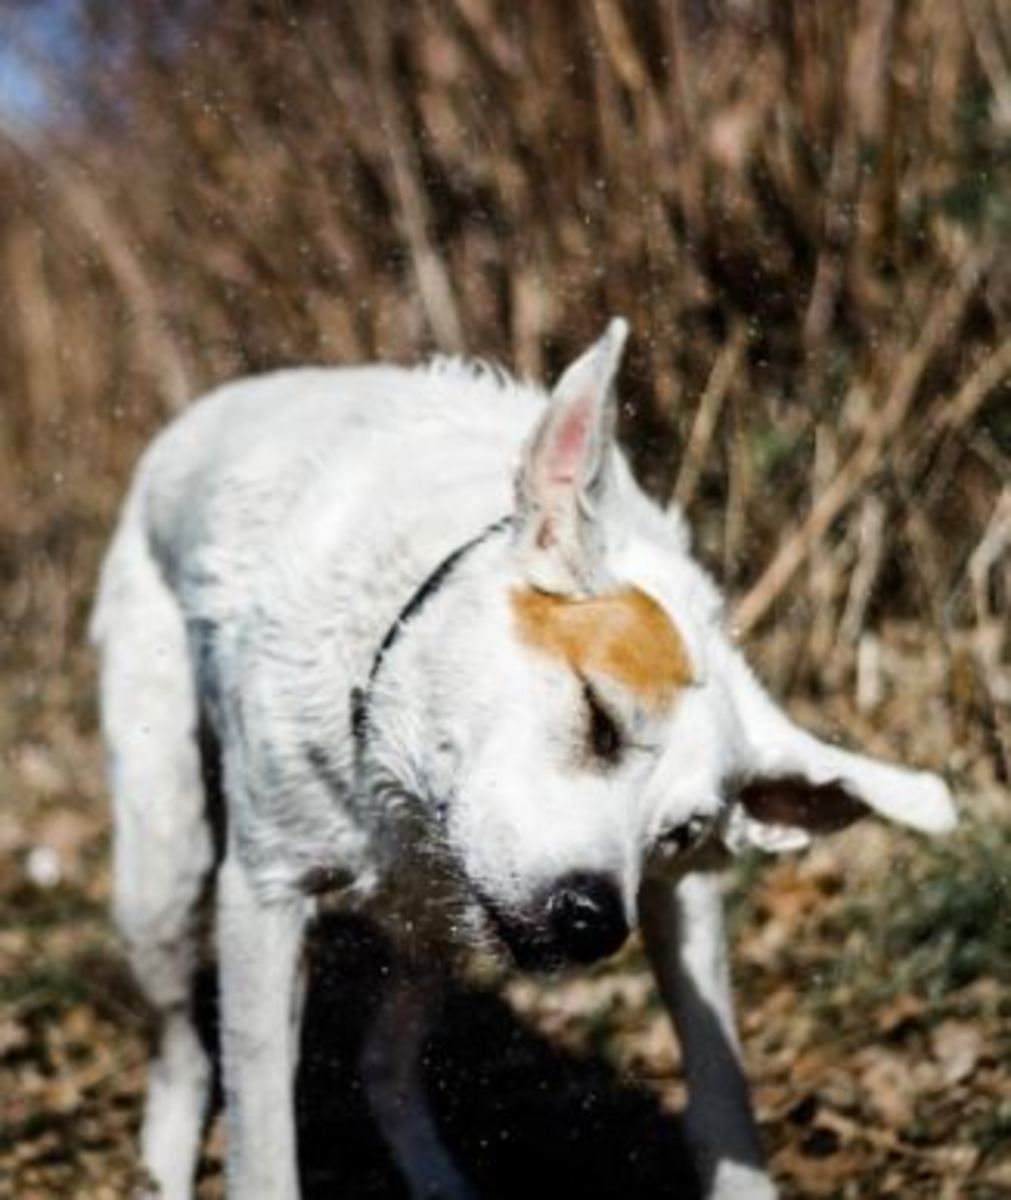 Excessive ear shaking may cause ear flap hematomas in dogs.